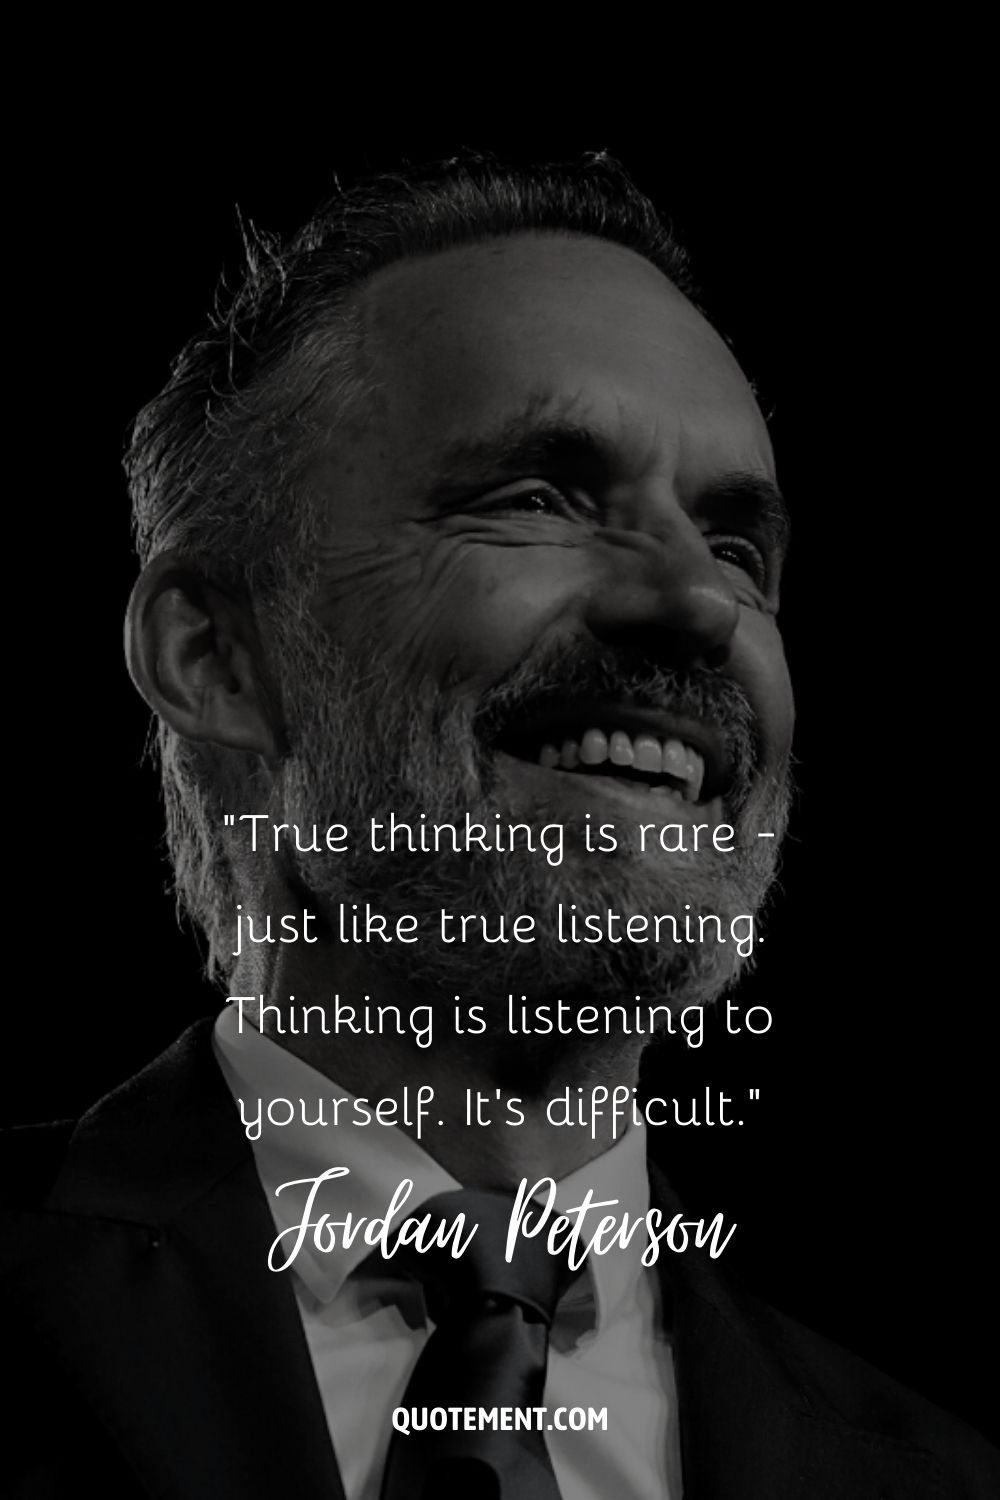 True thinking is rare - just like true listening. Thinking is listening to yourself. It’s difficult